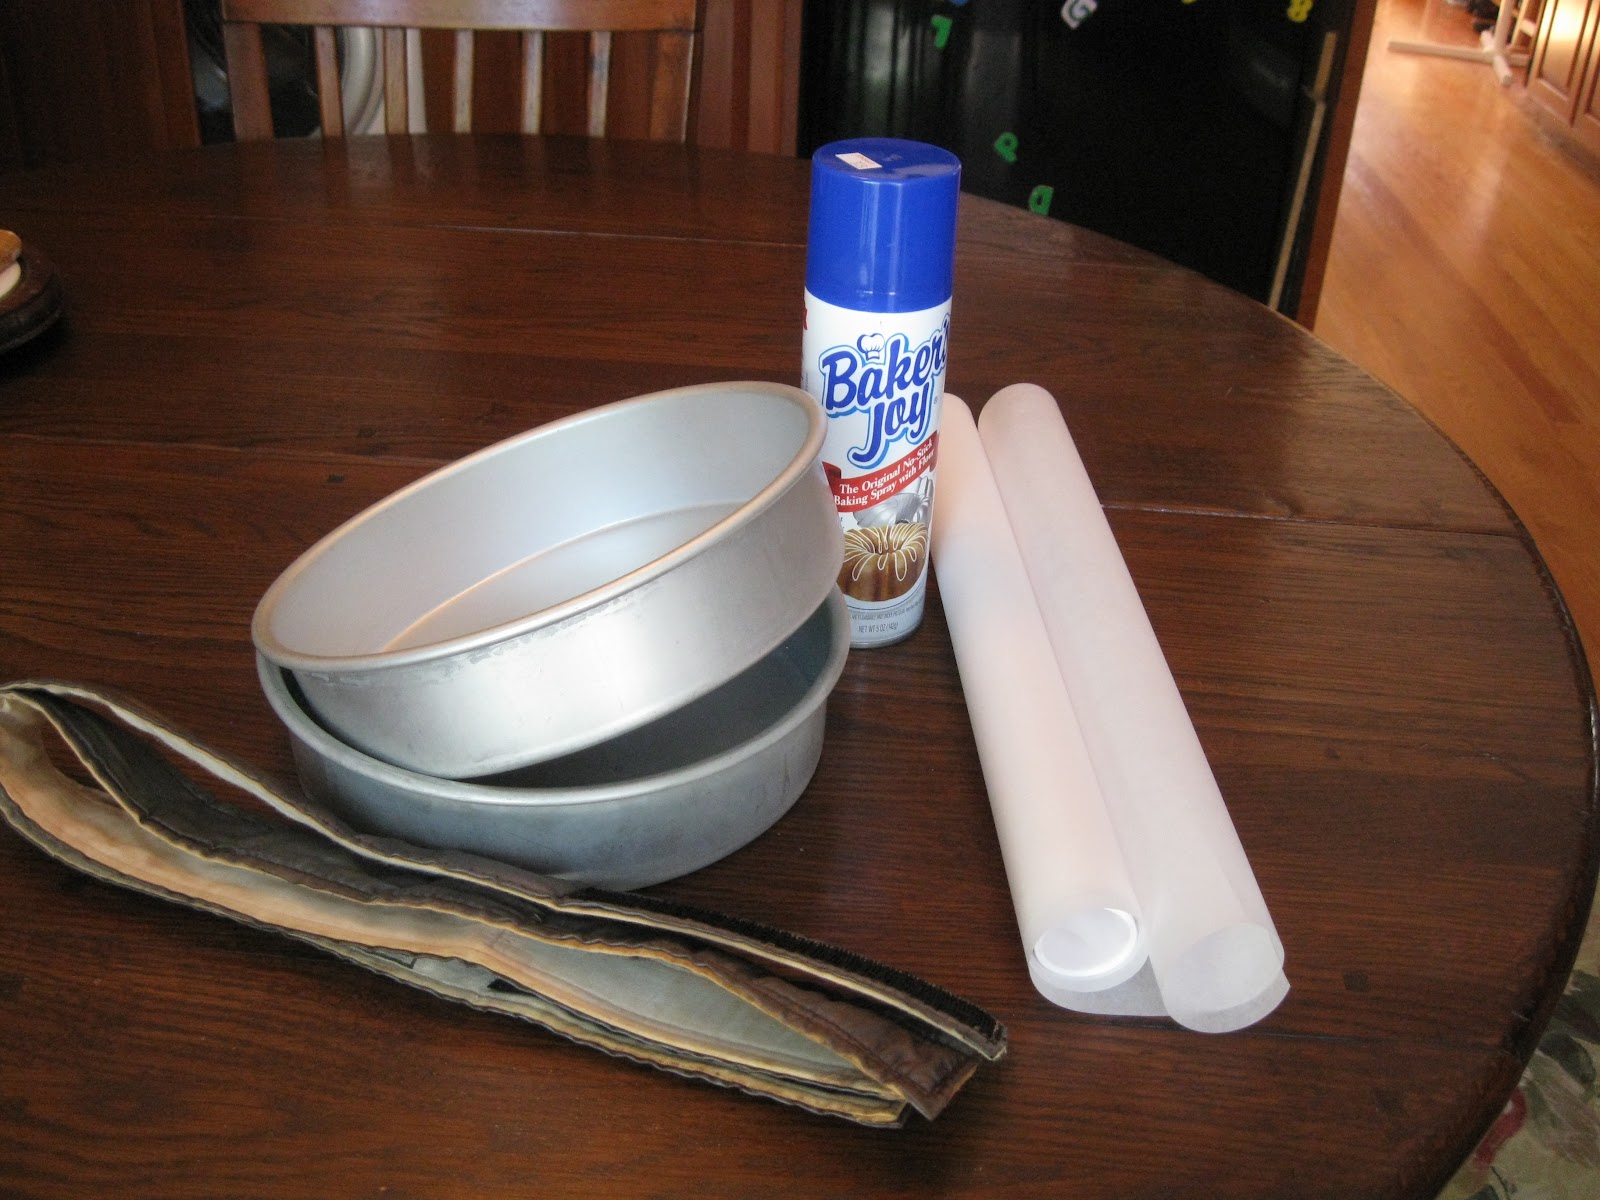 Springform Pan 101: What is a Springform Pan and How Do You Use It, Wilton's Baking Blog